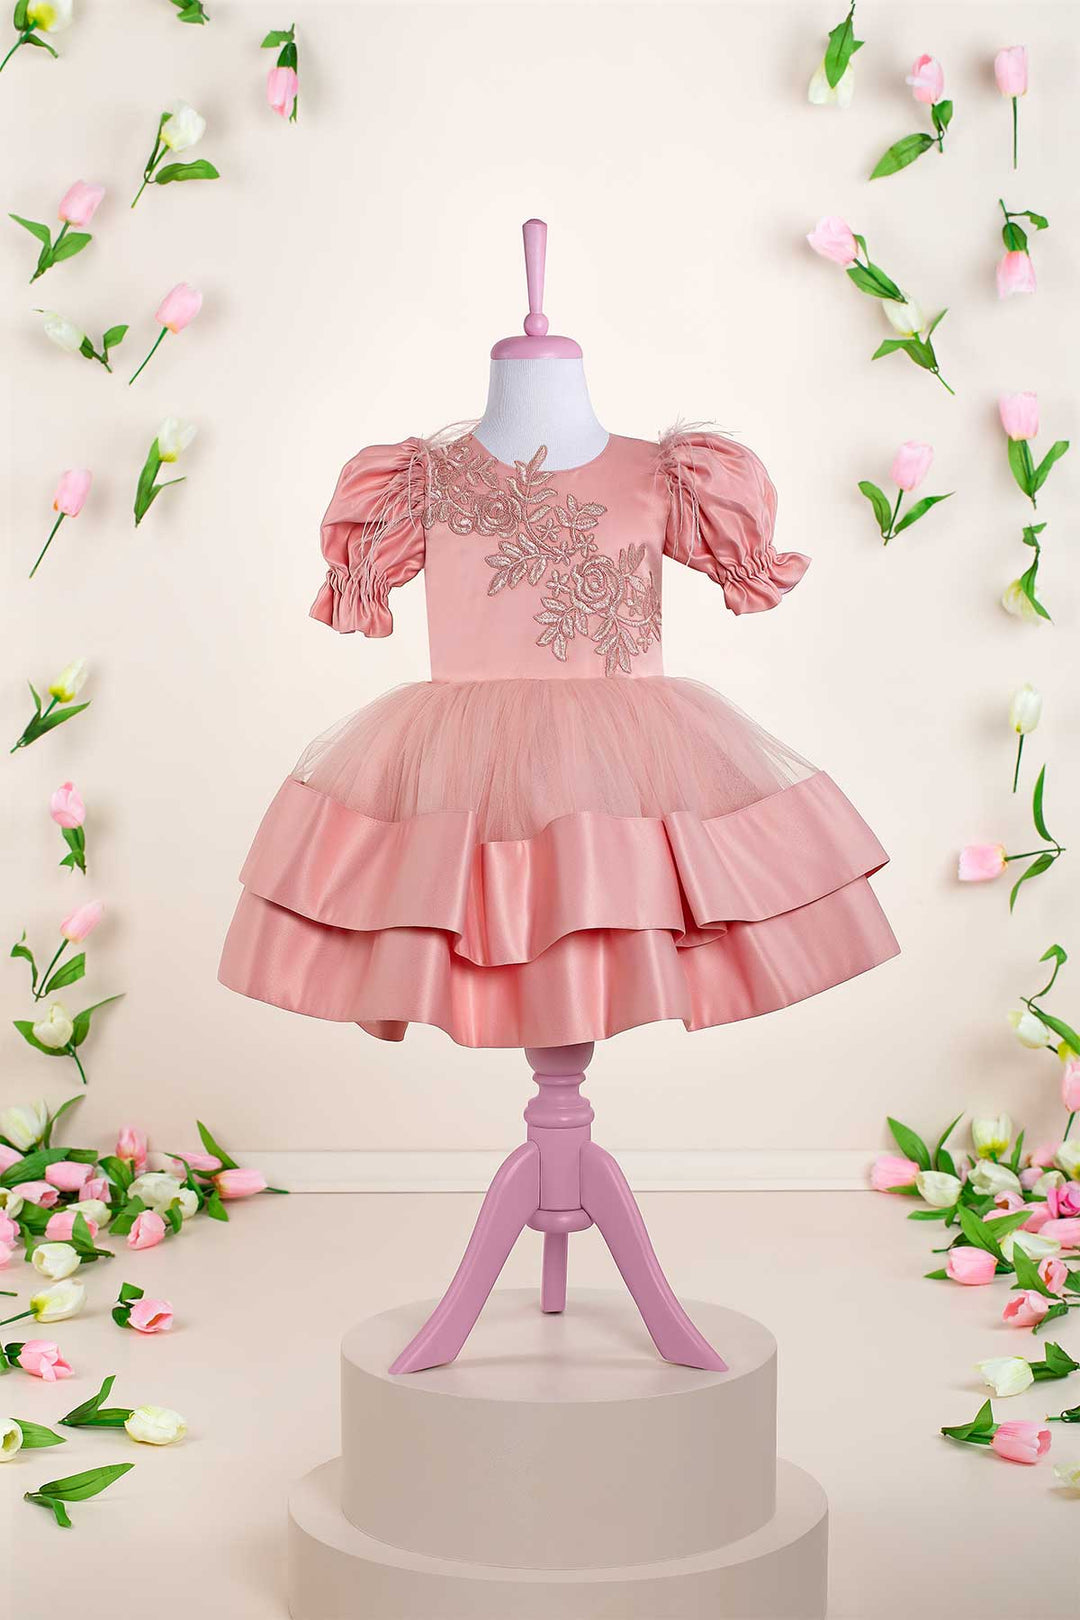 A pink baby dress that has balloon arm, half sleeves, lace embroidery, dream tulle knee length skirt, and feathers